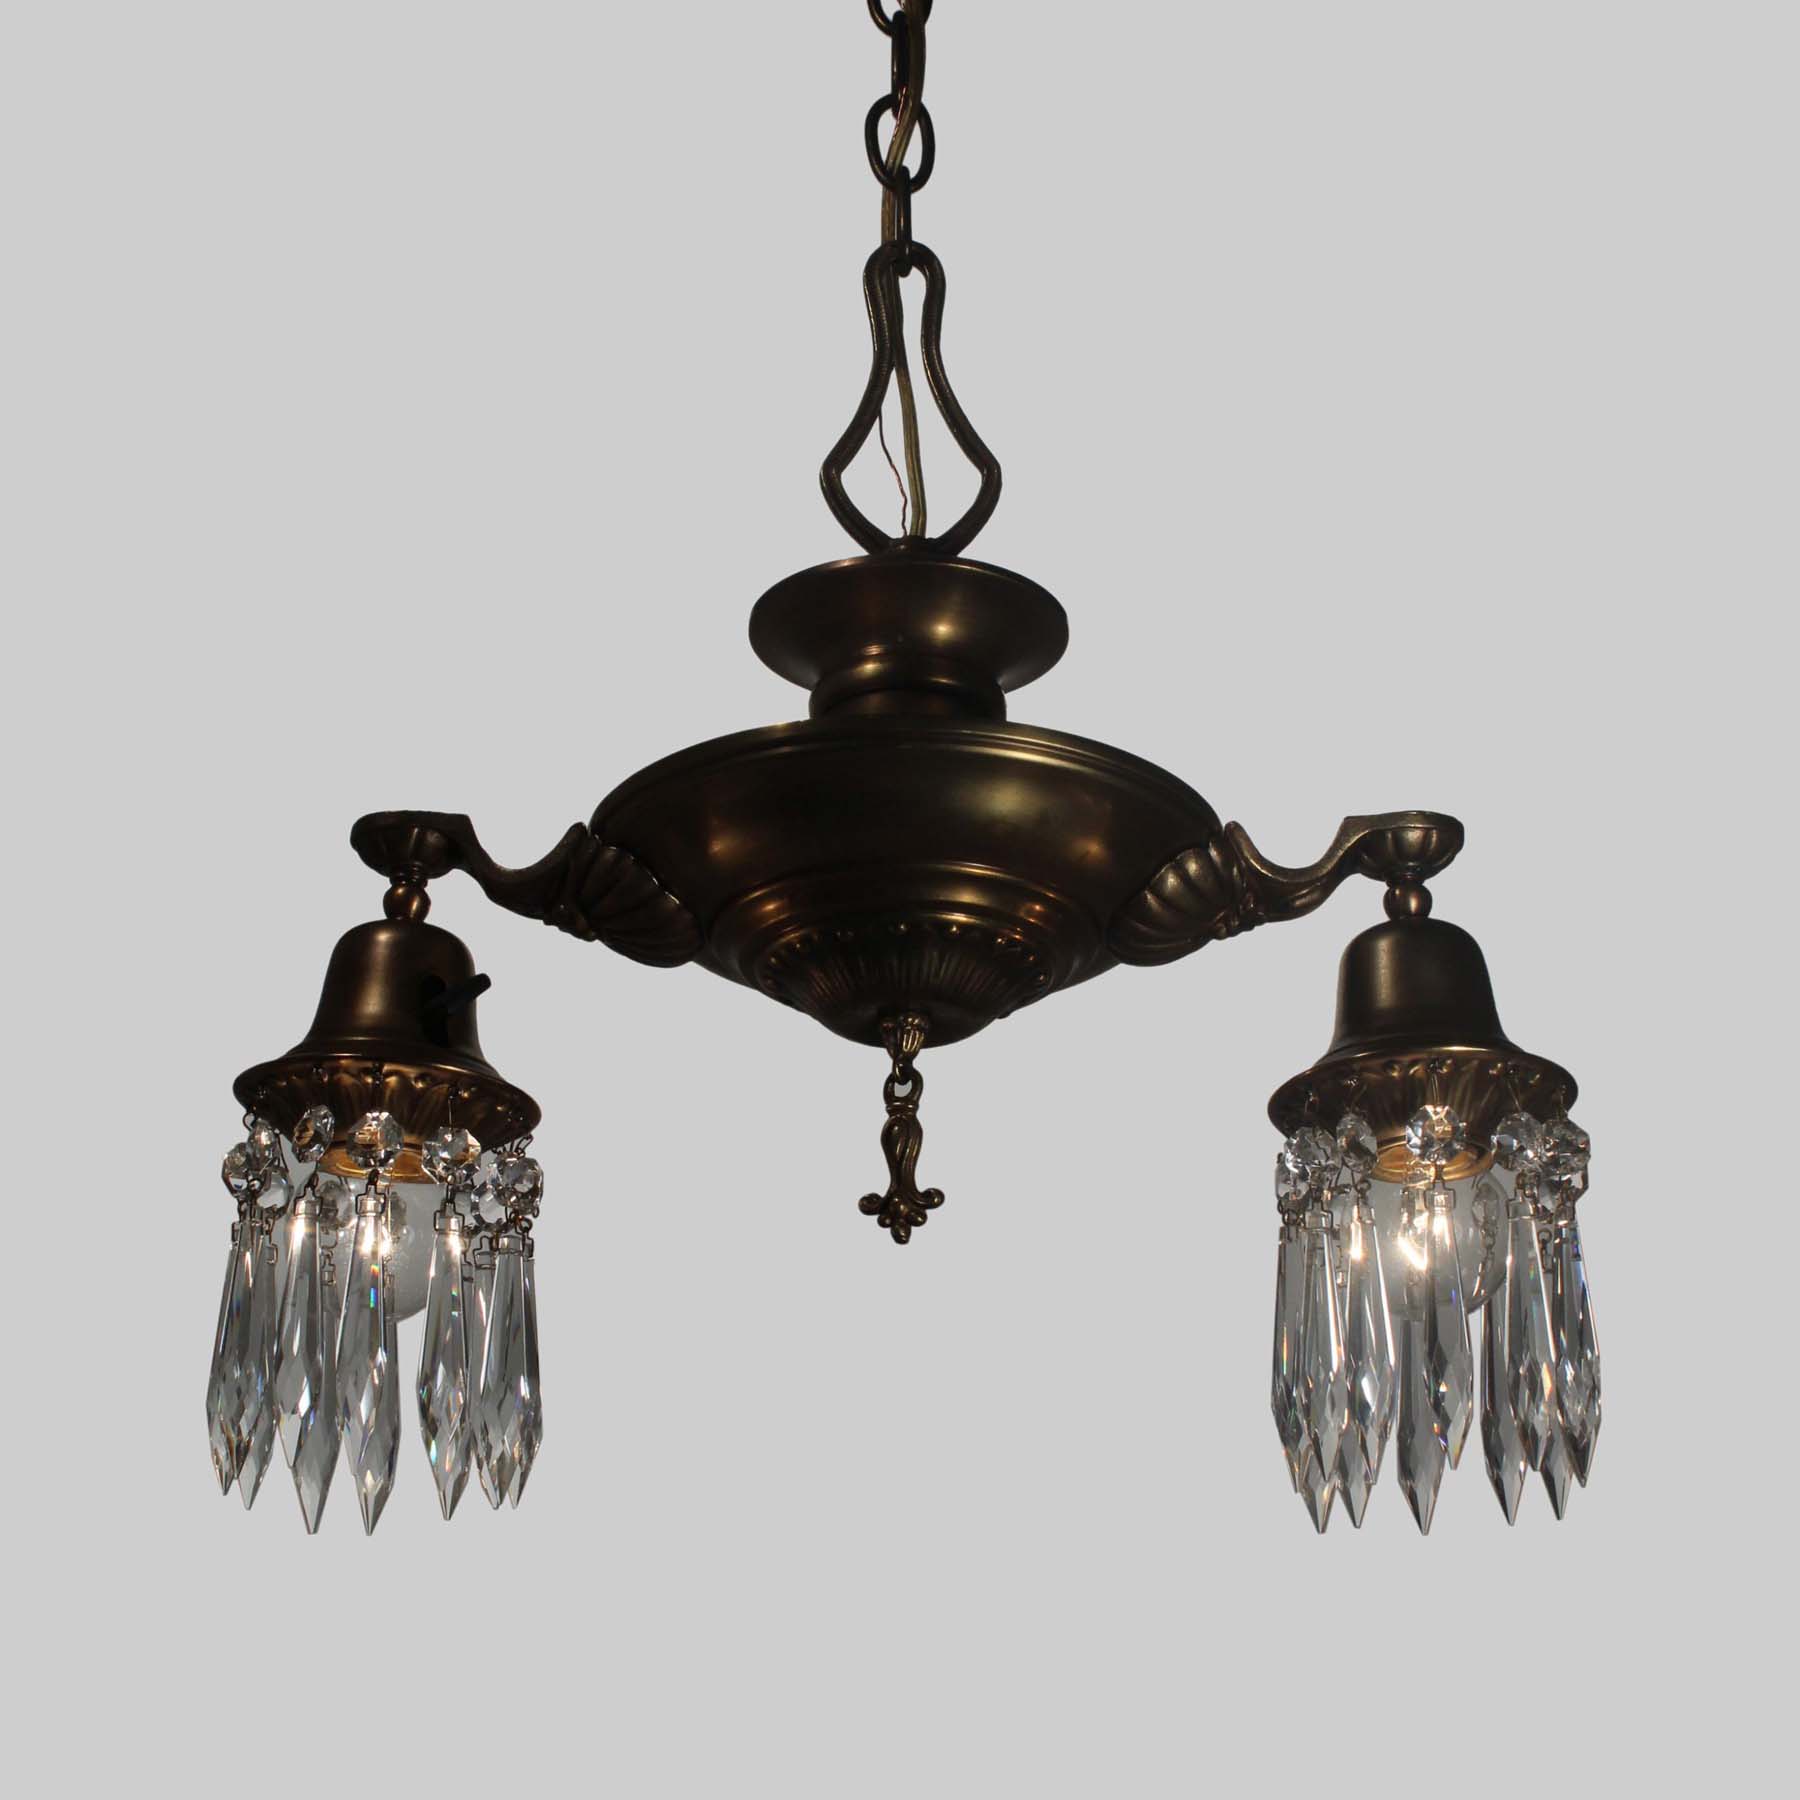 SOLD Brass Two Light Chandelier with Prisms, Antique Lighting-67019